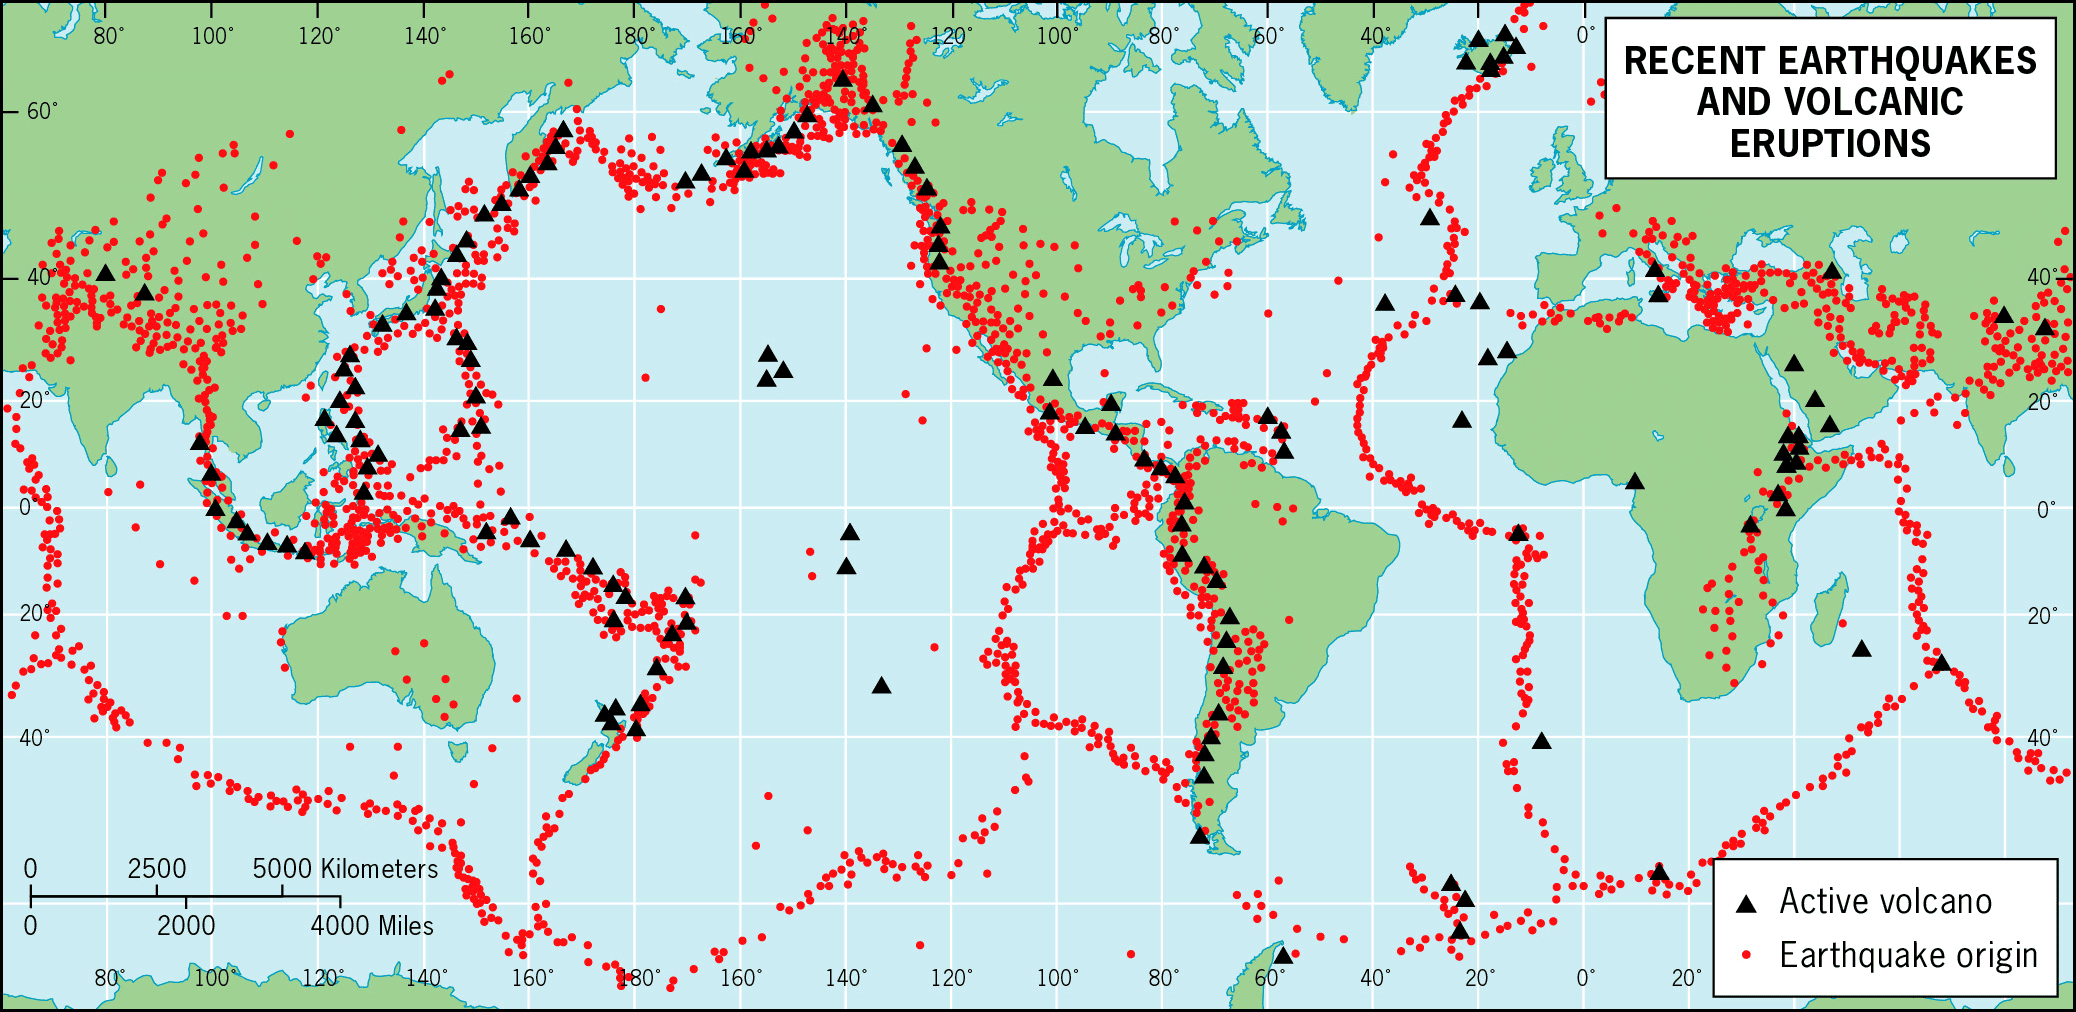 Map of recent earthquakes and volcanic eruptions of the world